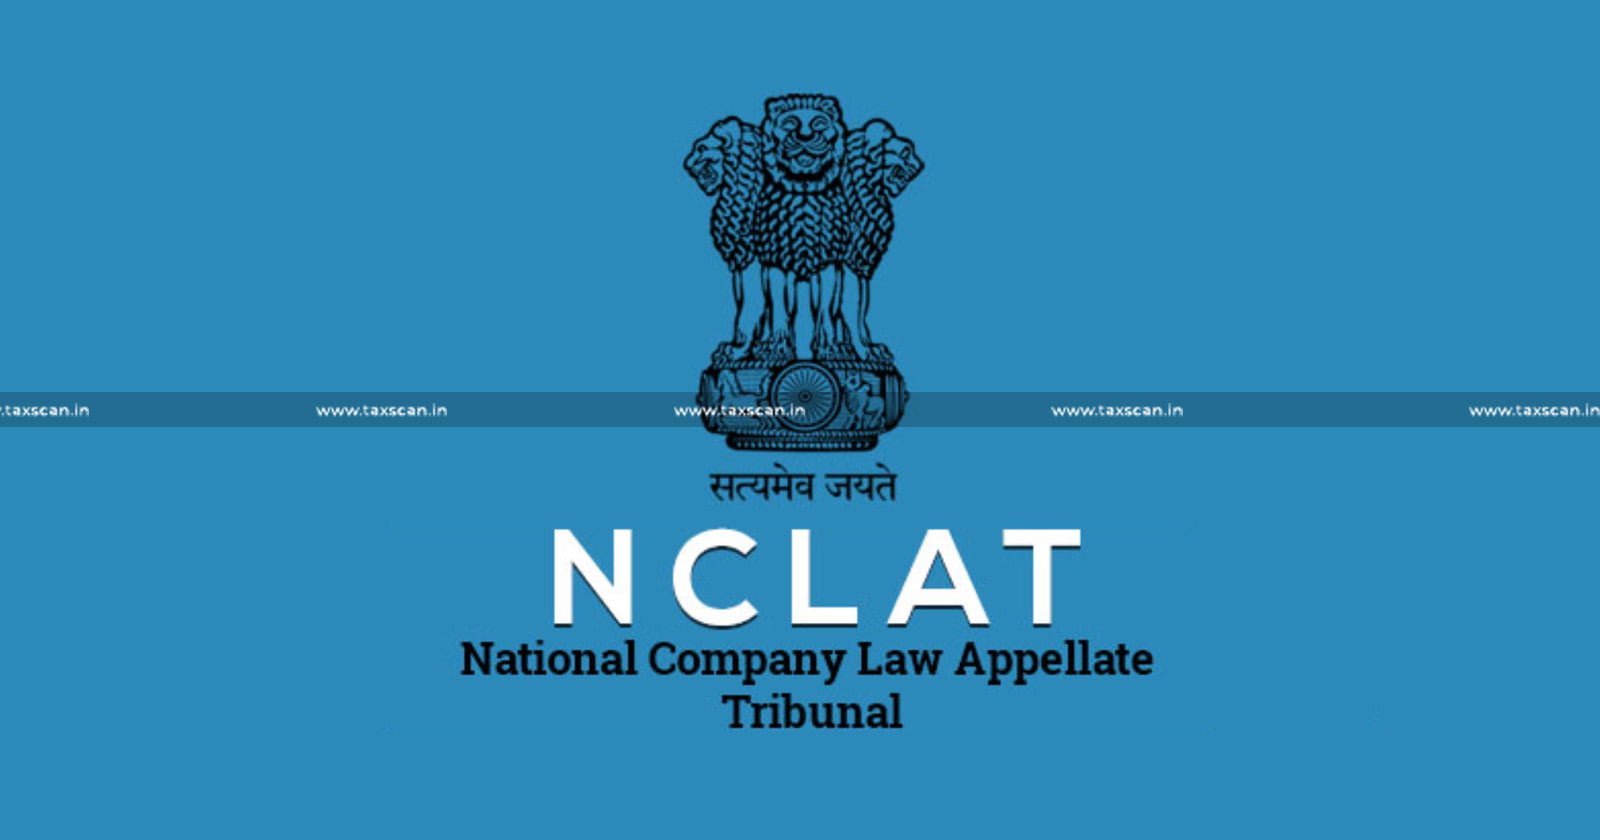 Claim of Operational Creditor - Operational Creditor - greement - Stamped Paper - Corporate Debtor - Premises - NCLAT - taxscan